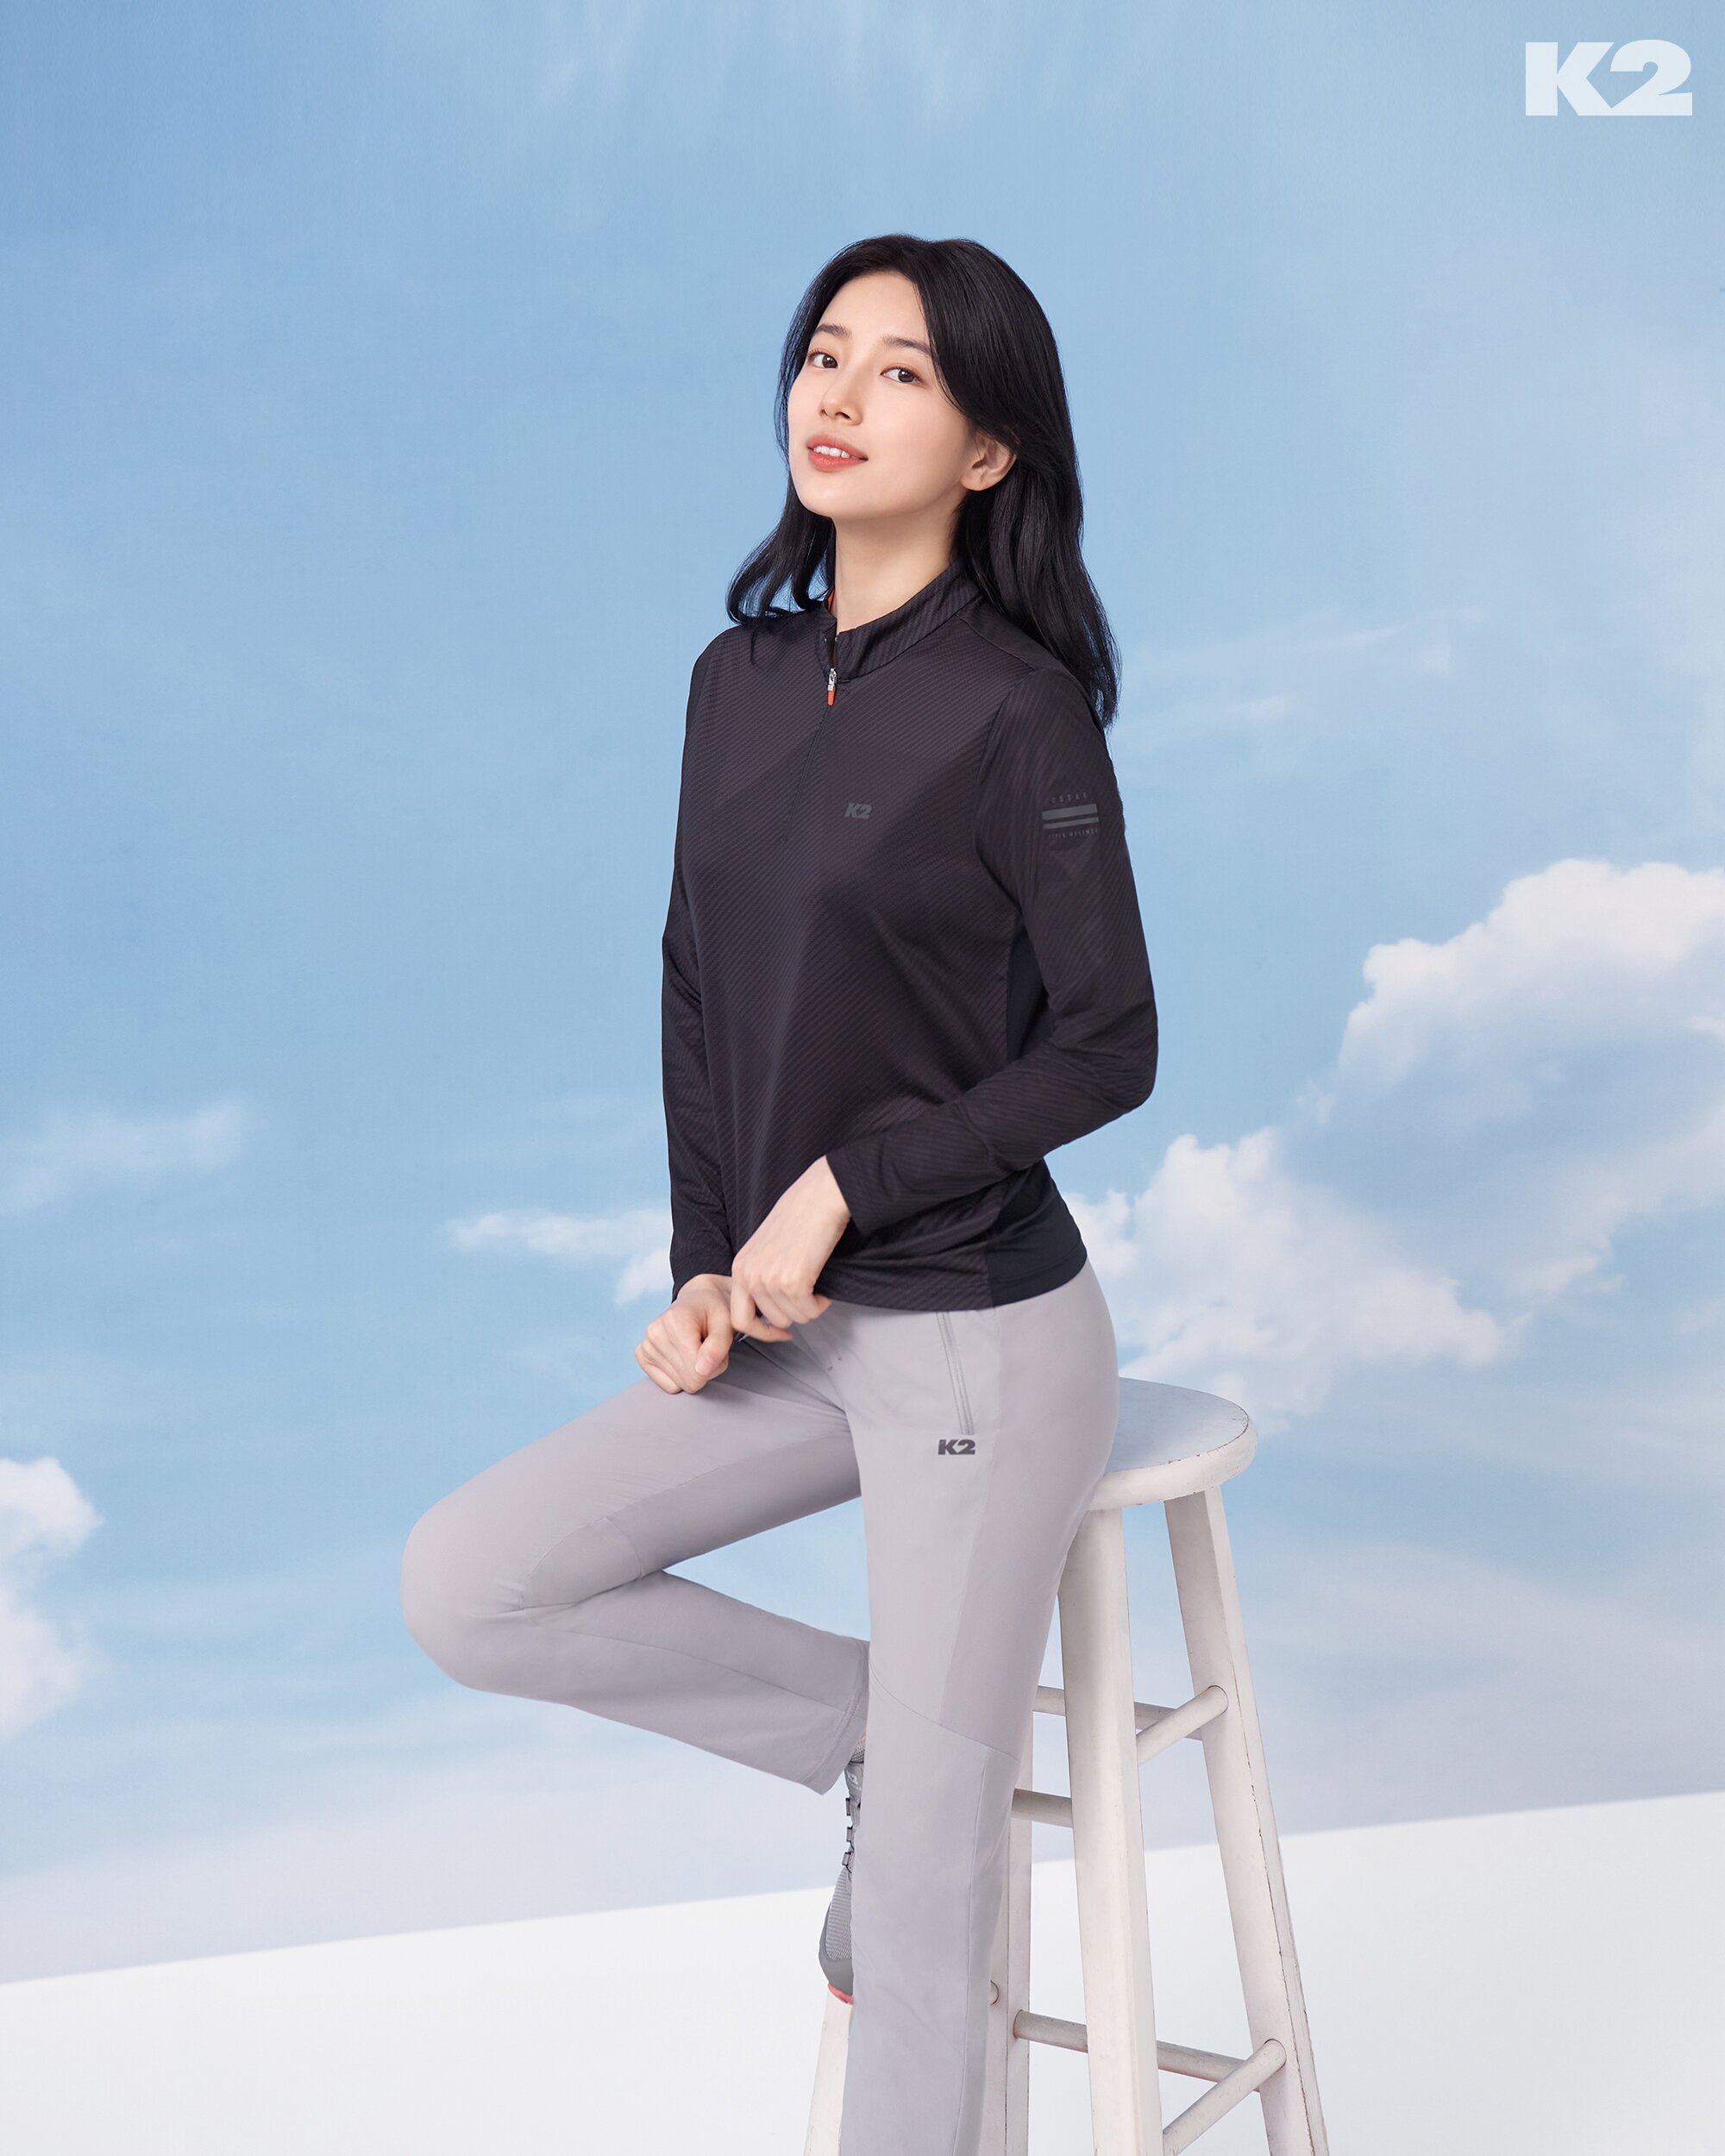 Bae Suzy for K2 2022 Summer Collection 'ICE WEAR' | kpopping